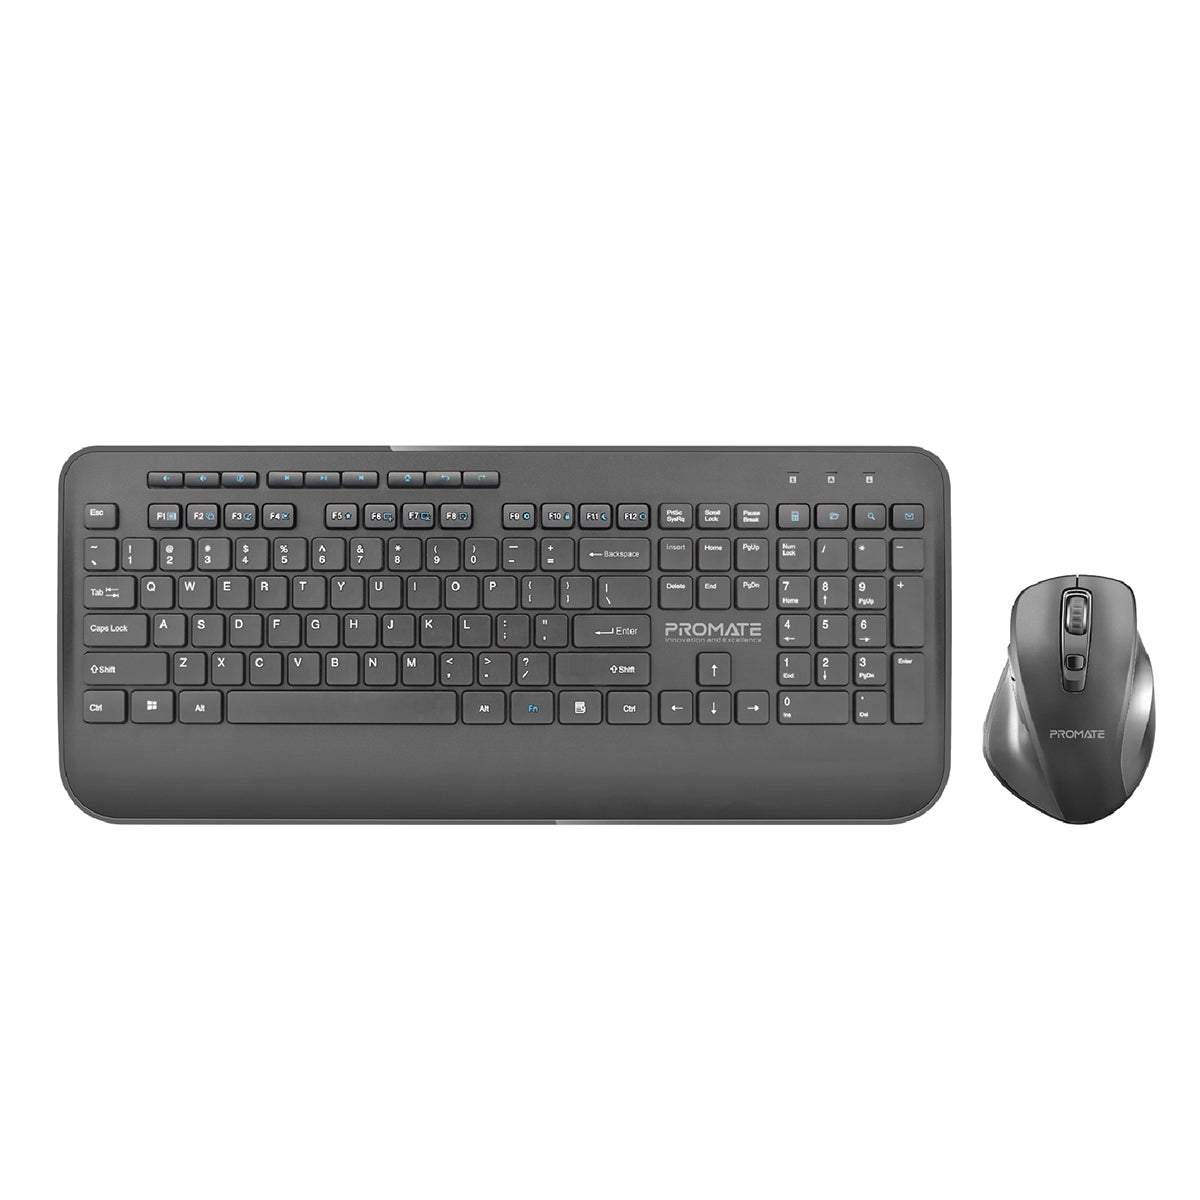 Promate Wireless Keyboard and Mouse Combo, Ergonomic Sleek 2.4Ghz Full-Size Wireless Keyboard with Palm Rest and 1600 DPI Mouse, Nano USB Receiver and Auto-Sleep Function for PC, Desktops, Windows, IOS, ProCombo-8 English